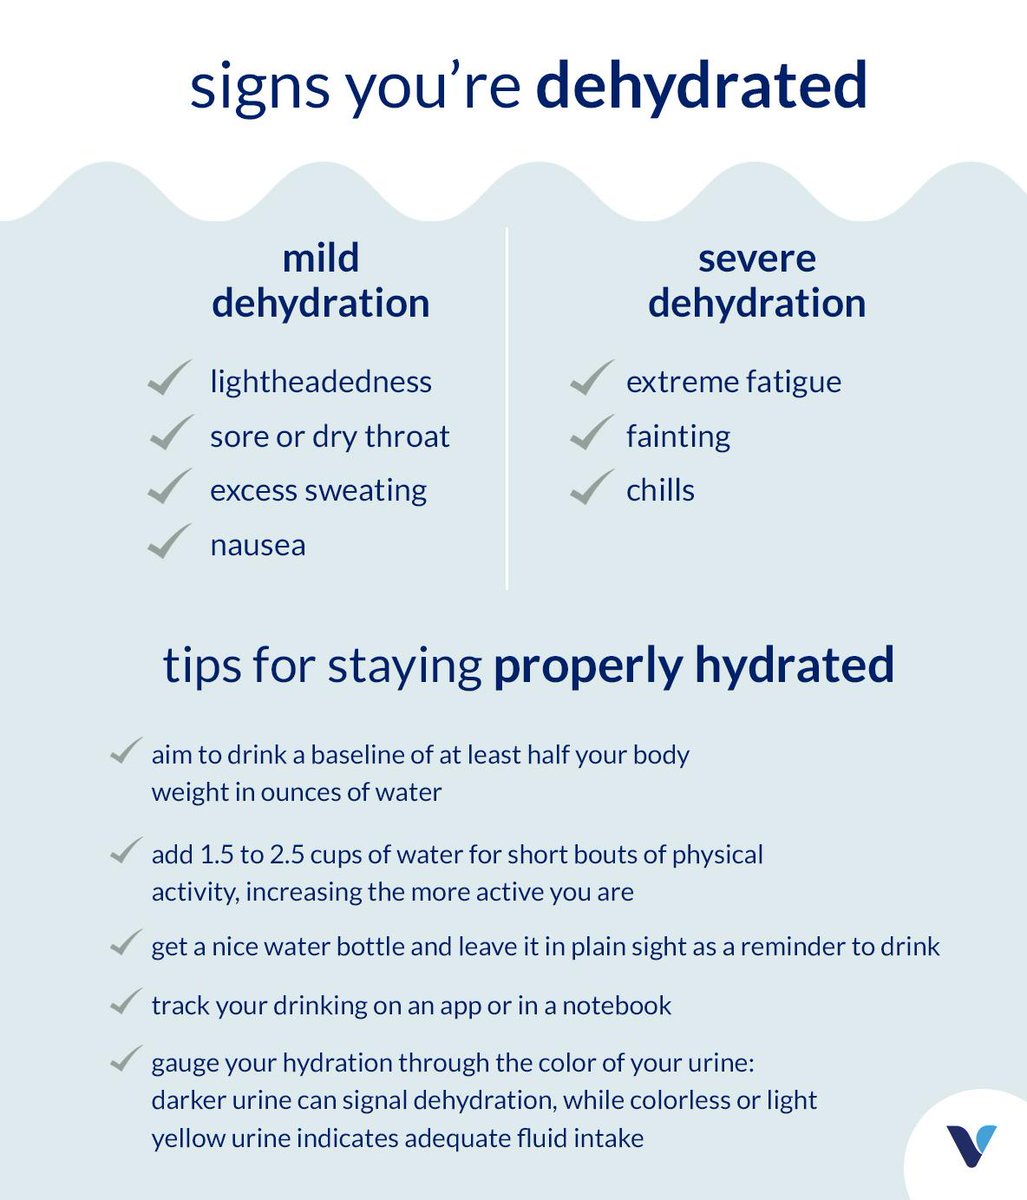 The Shoppe sur Twitter : "Here's what you should about dehydration so you can the short- and long-term effects of it. https://t.co/ACCW39B8Is" / Twitter